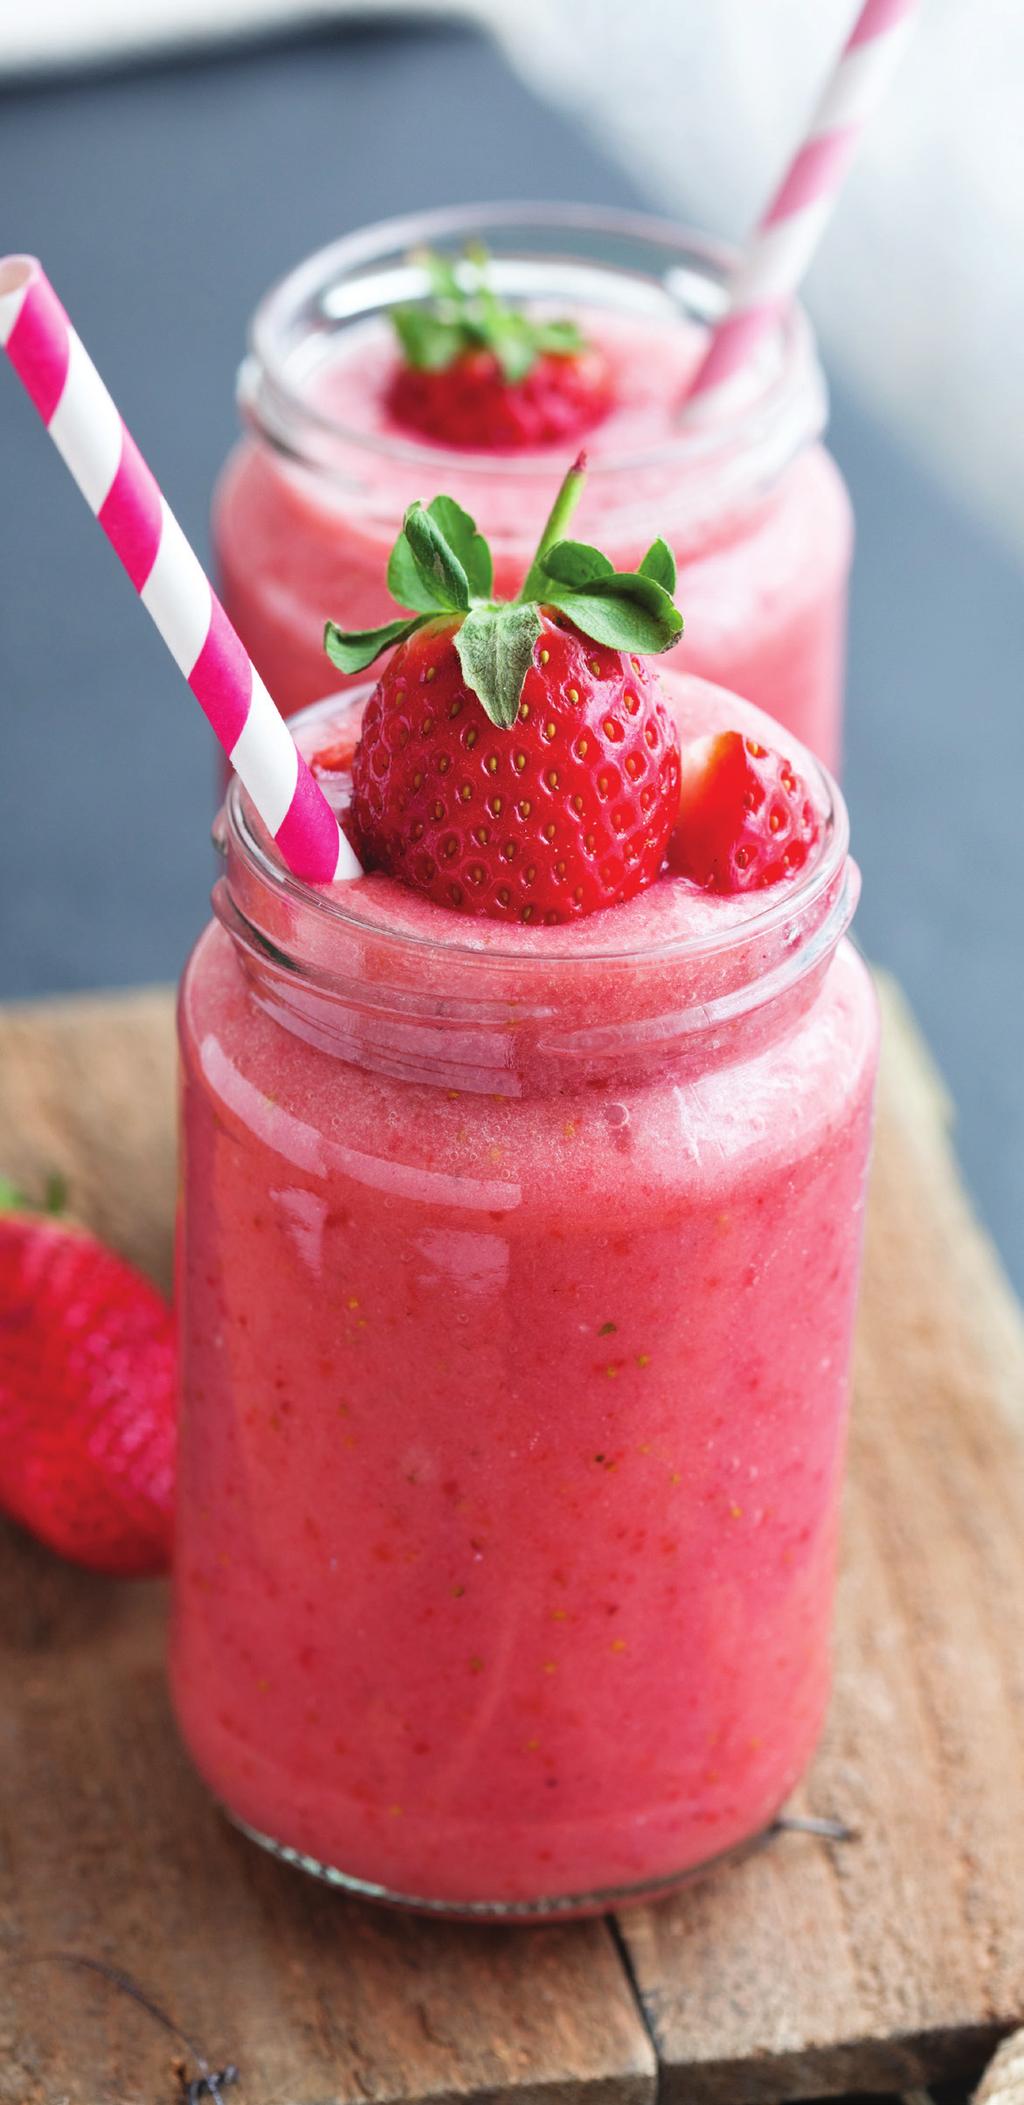 BERRY RED SMOOTHIE Sip for sip, berries offer a higher concentration of antioxidants than most other foods.